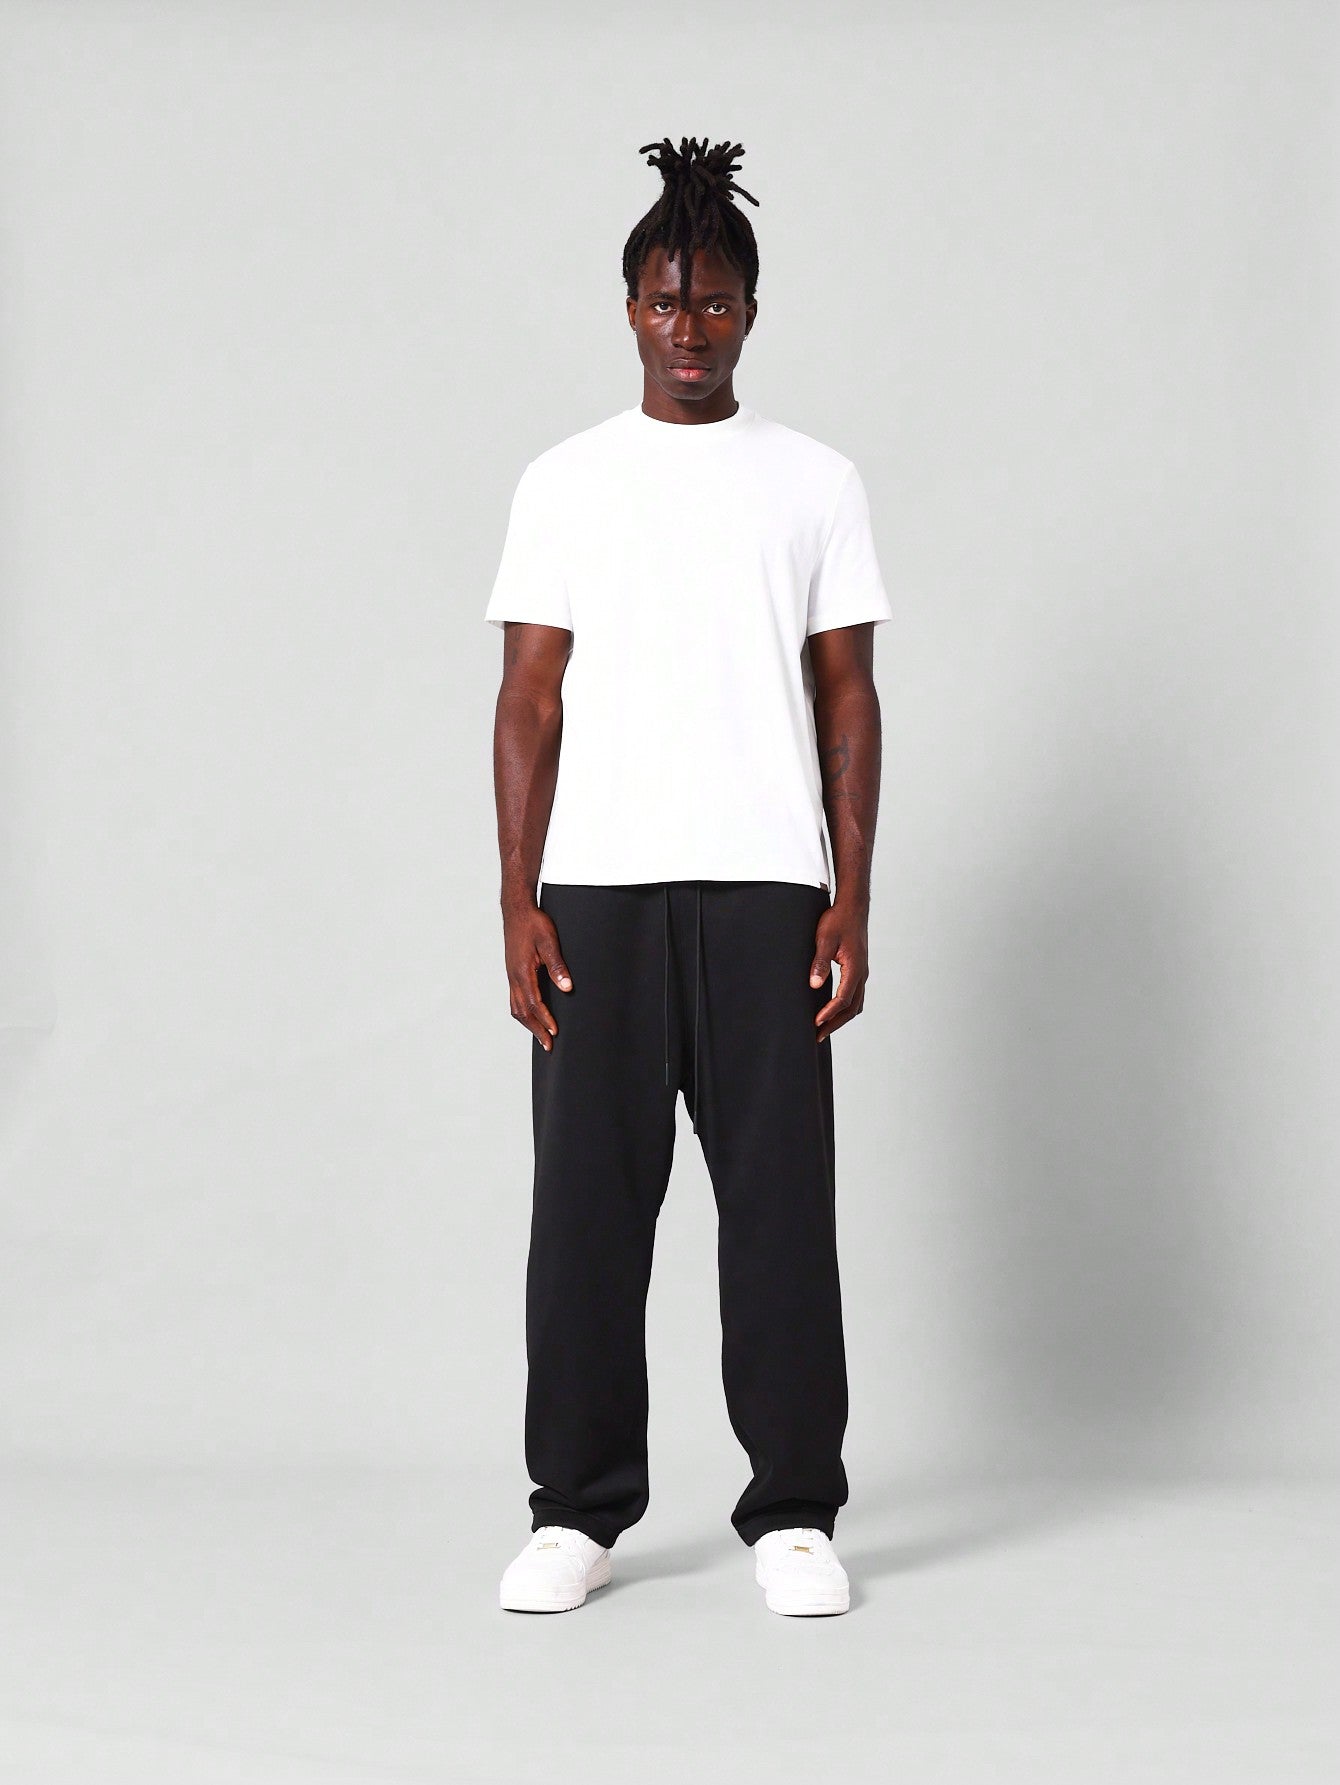 Loose Fit Essential Jogger